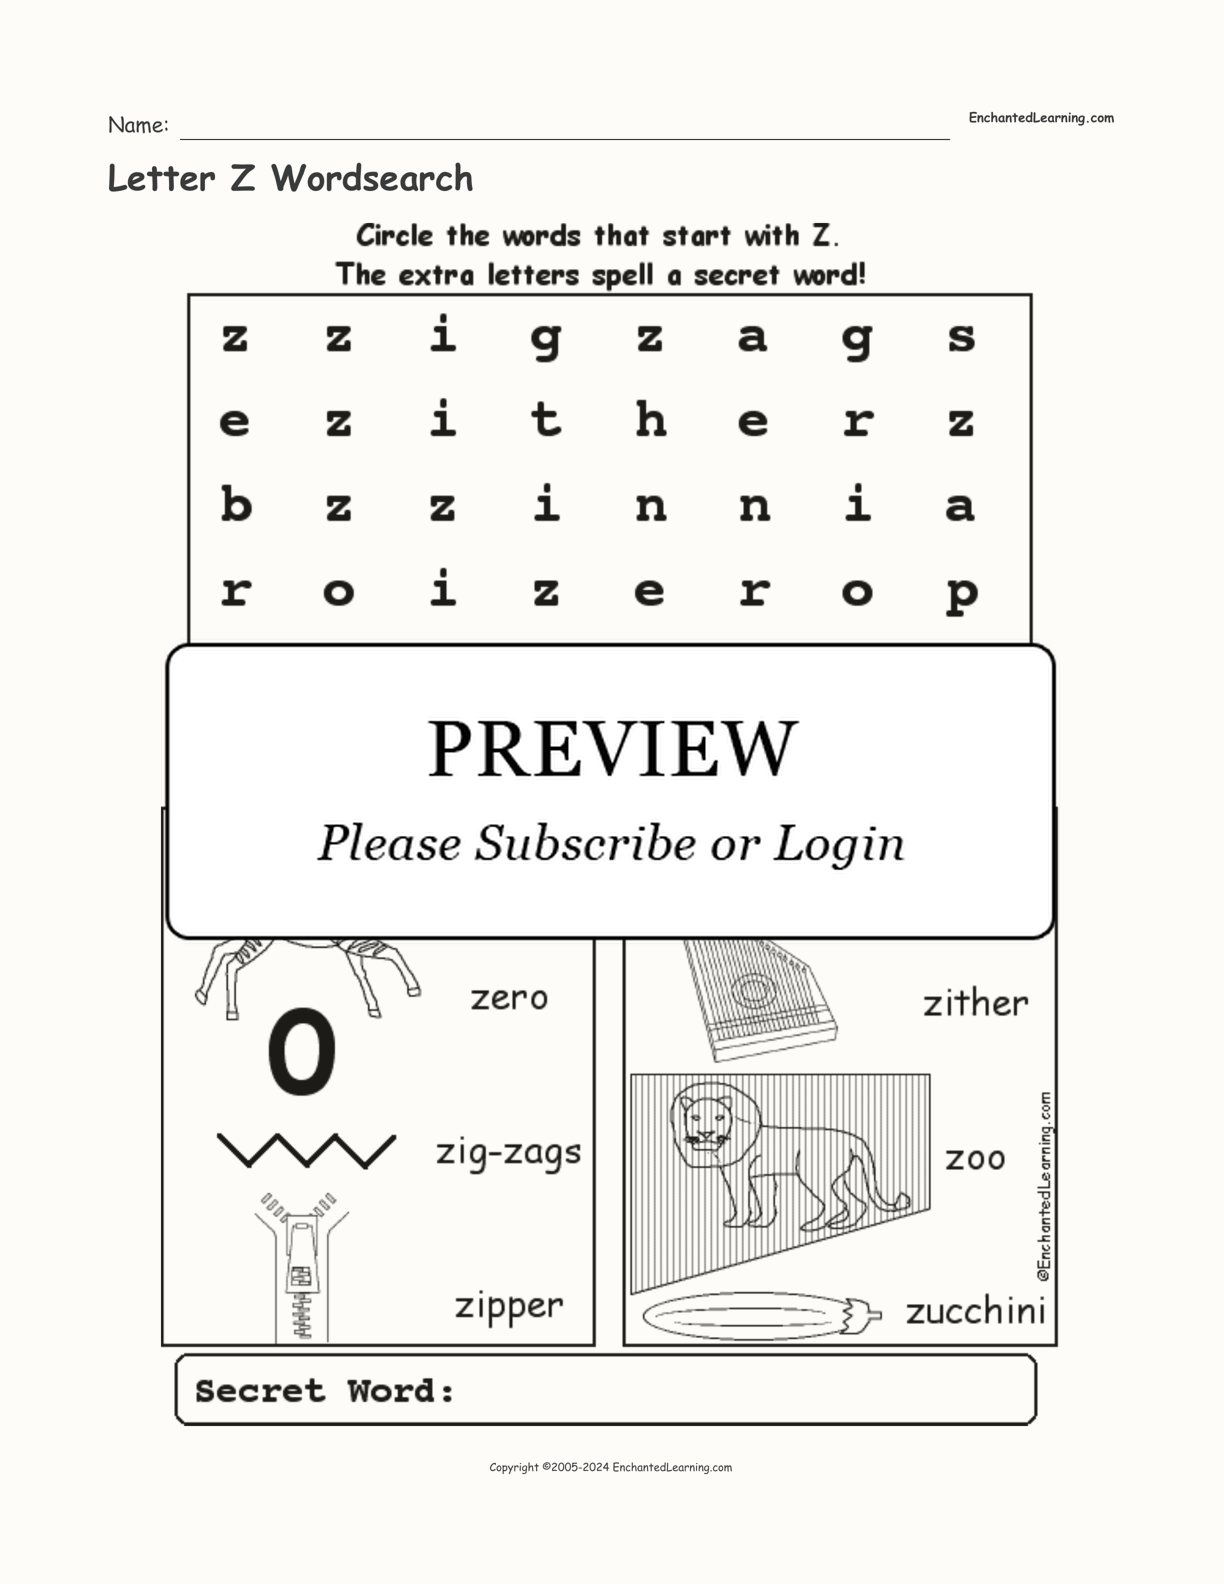 Letter Z Wordsearch interactive worksheet page 1